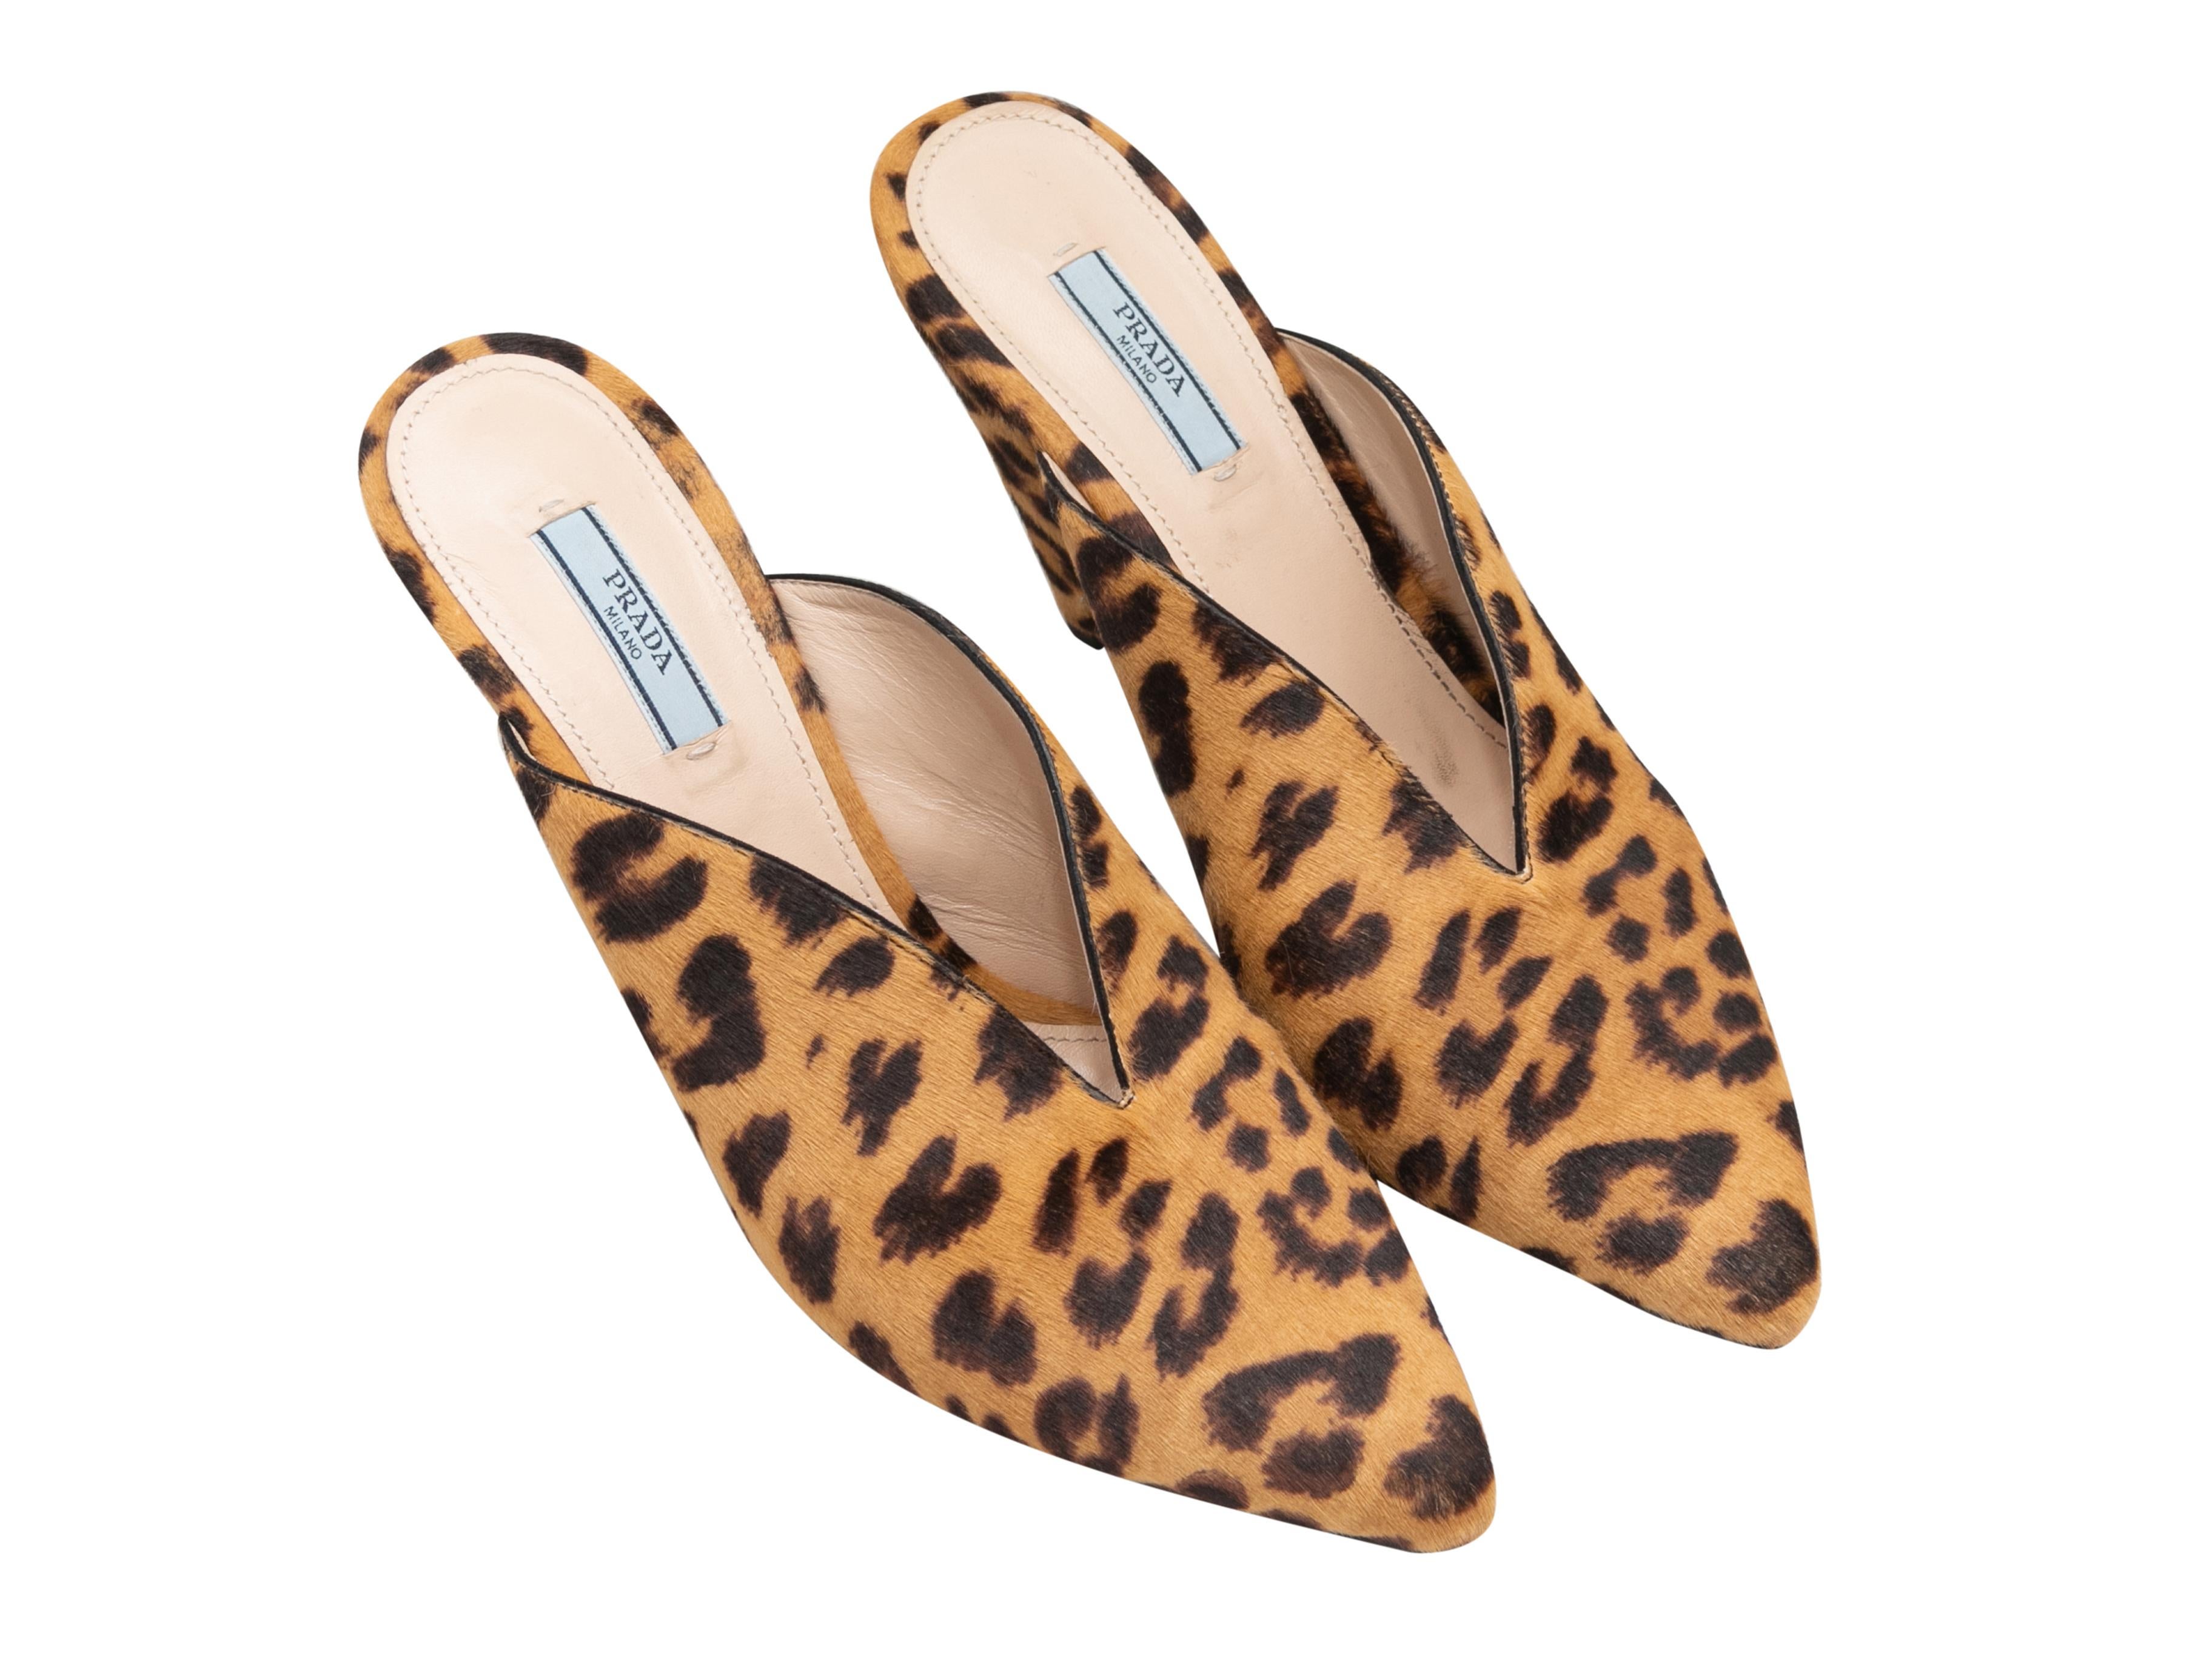 Tan & Black Prada Leopard Print Ponyhair Mules Size 39 In Good Condition For Sale In New York, NY